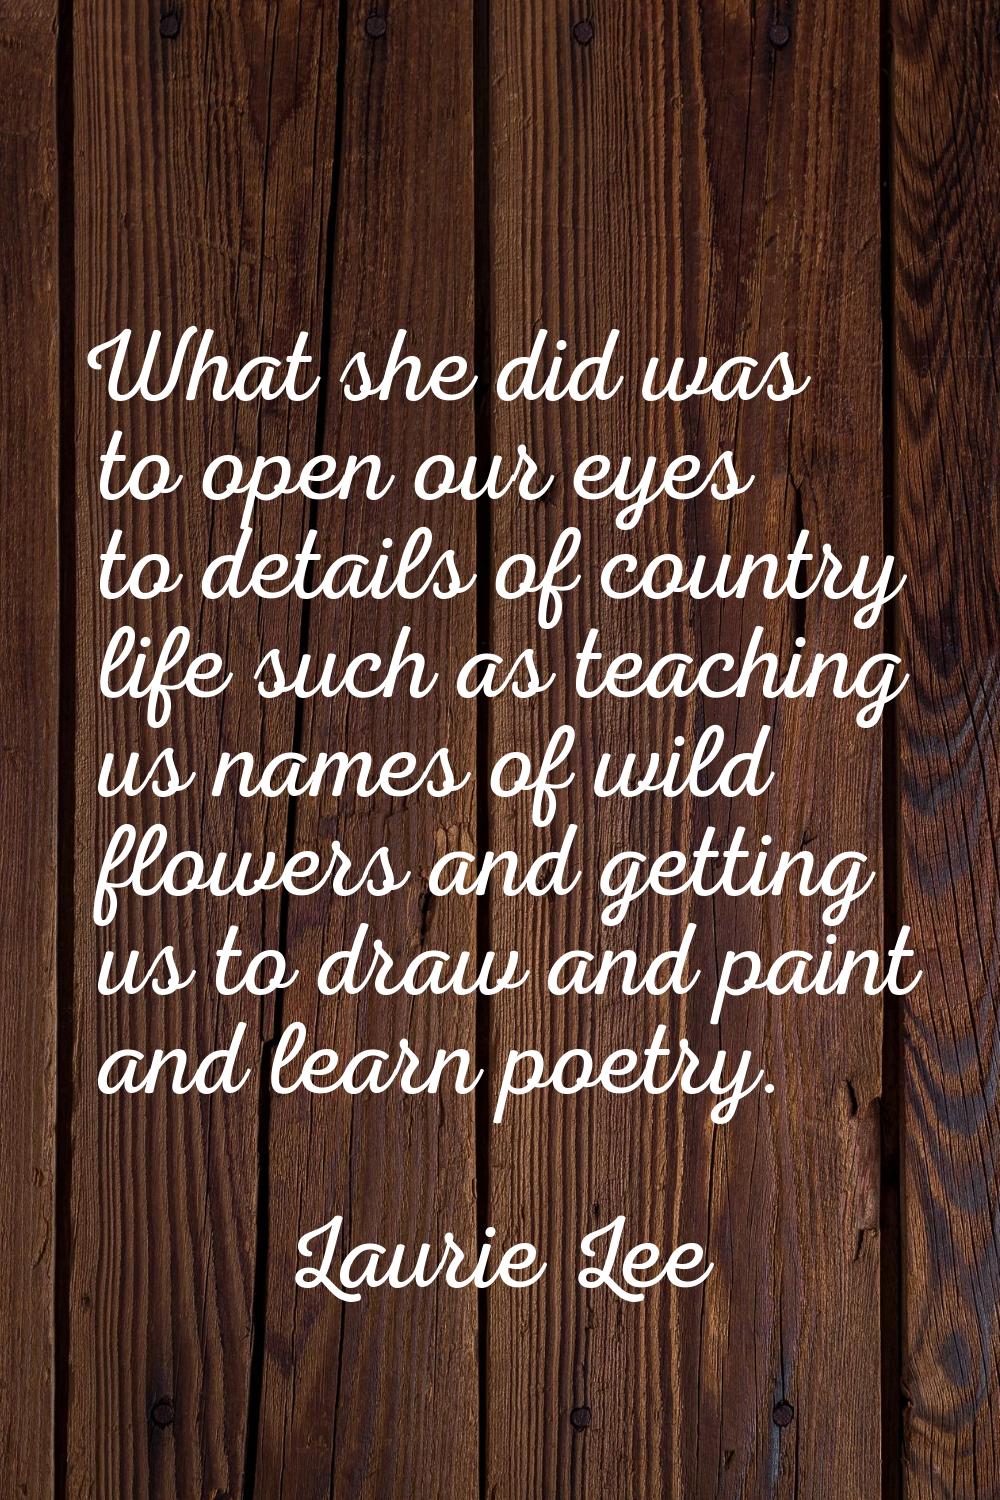 What she did was to open our eyes to details of country life such as teaching us names of wild flow